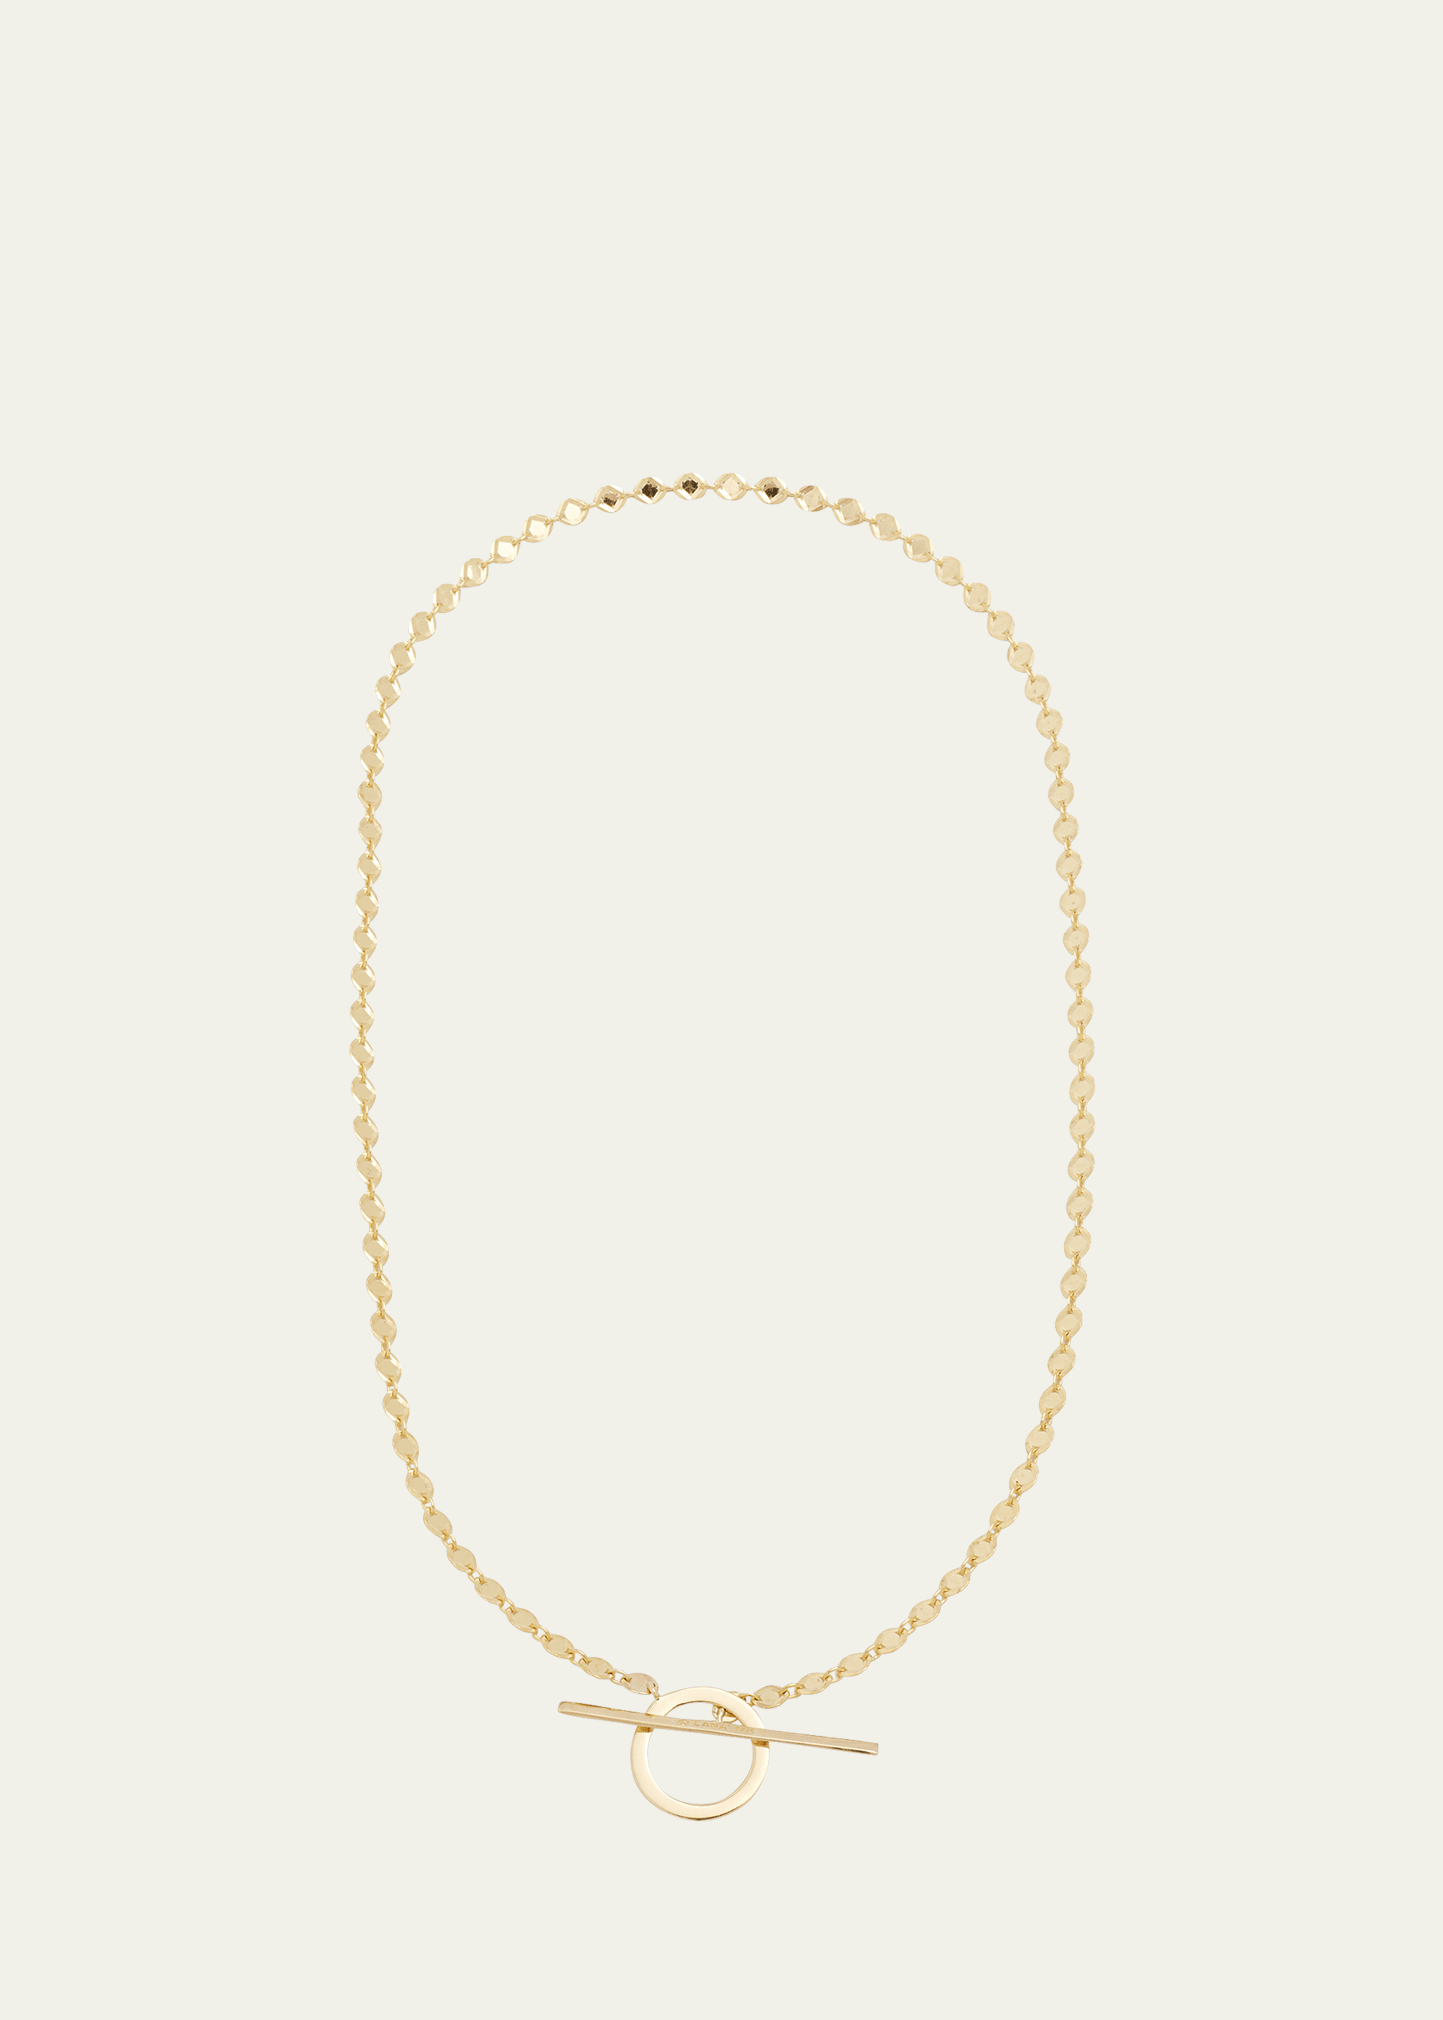 LANA 14K Yellow Gold Chain Toggle Necklace